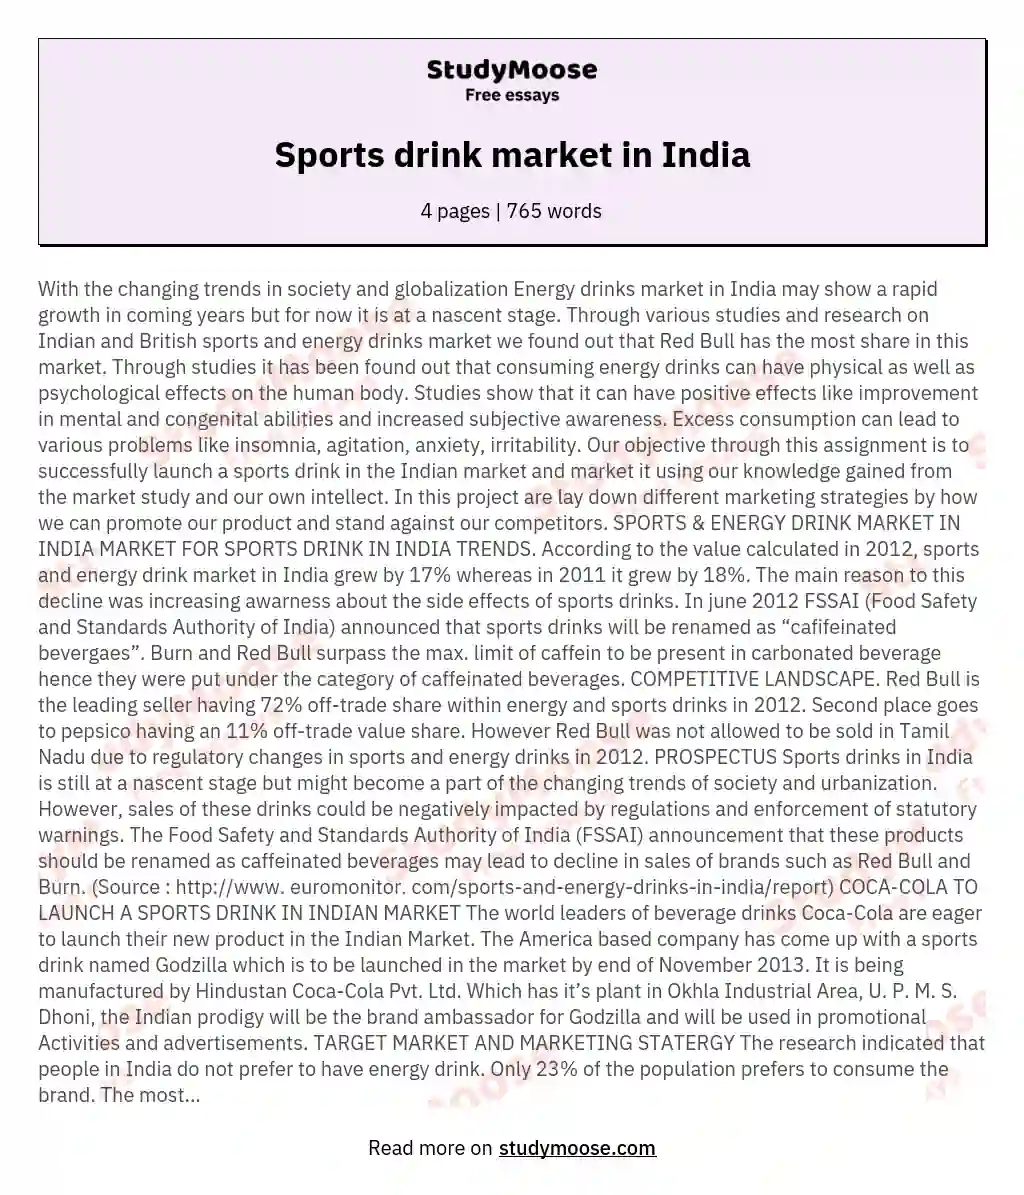 Sports drink market in India essay